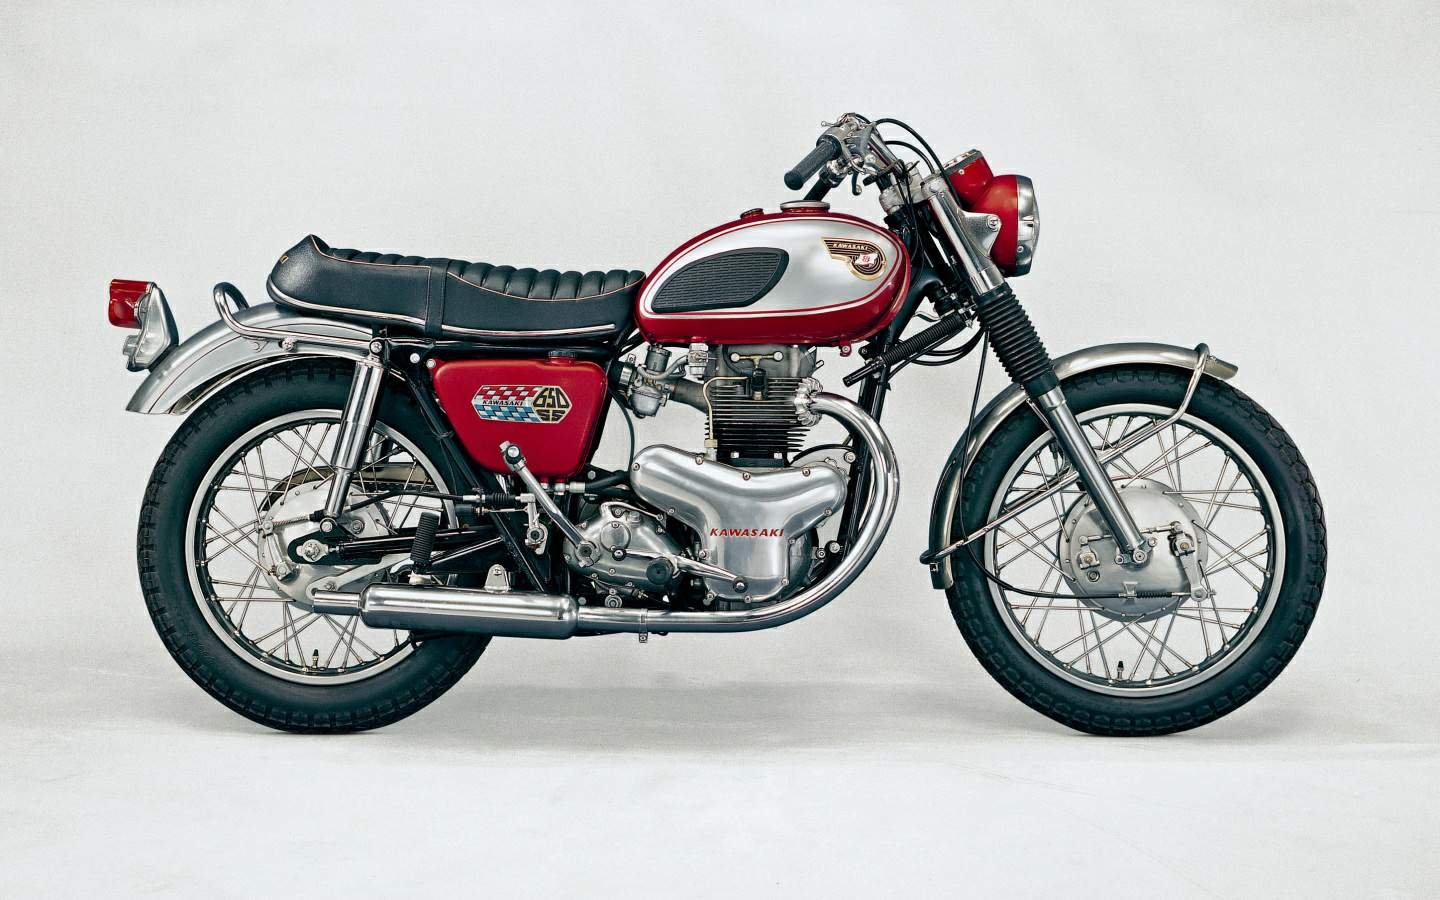 From Copycat to Ground Breaking: The history of the Kawasaki W1 